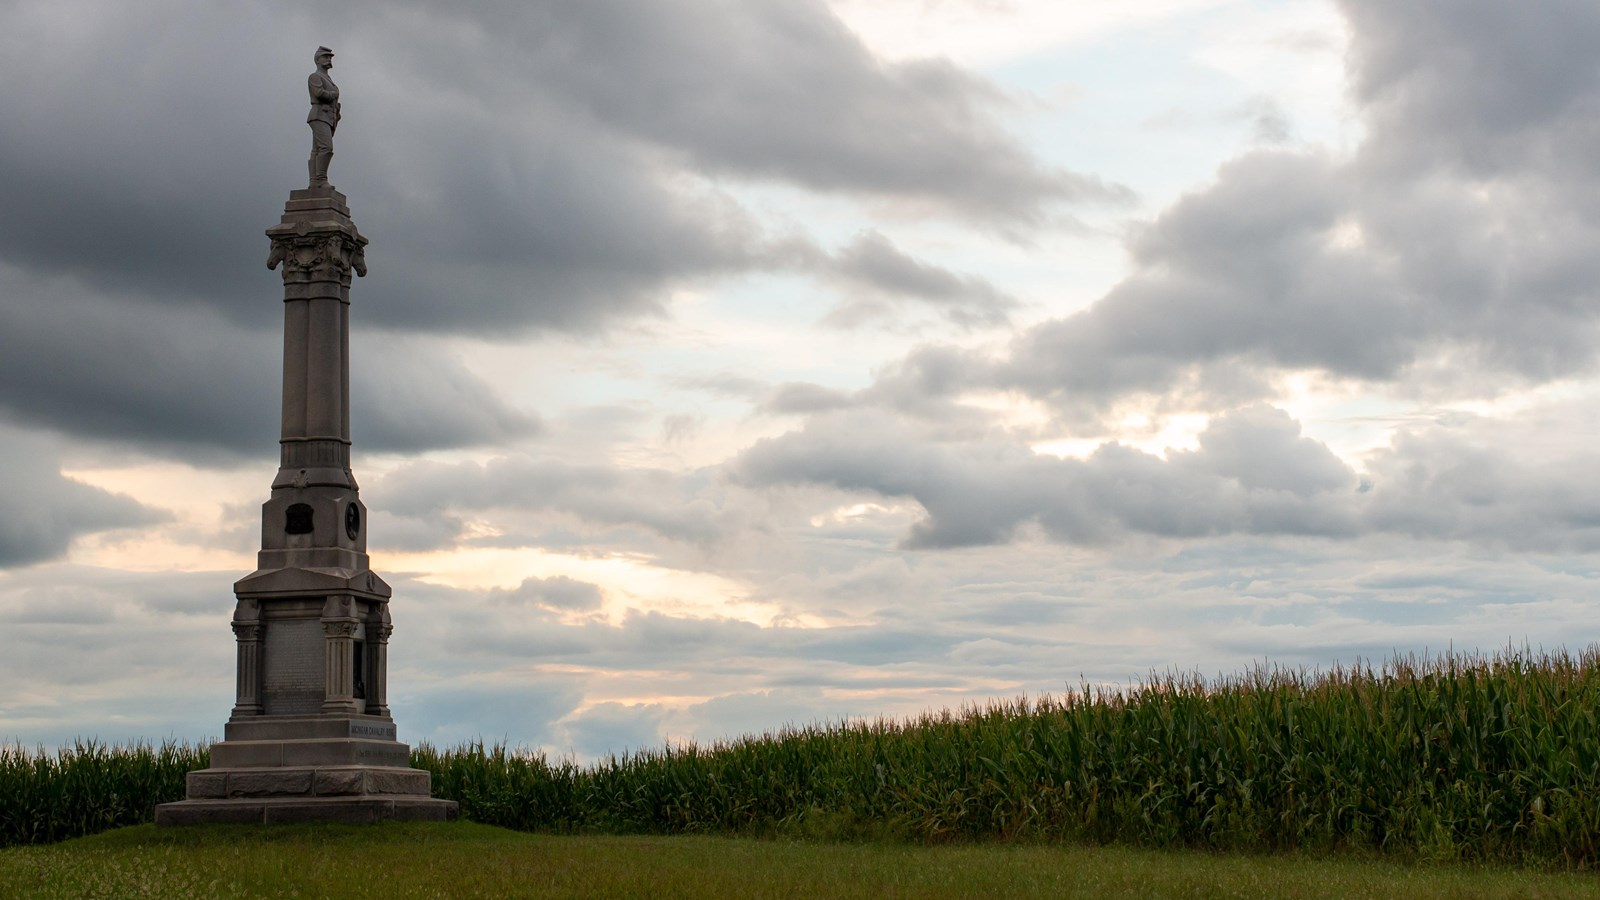 A large marble statue with a soldier at the top overlooking a grass field.